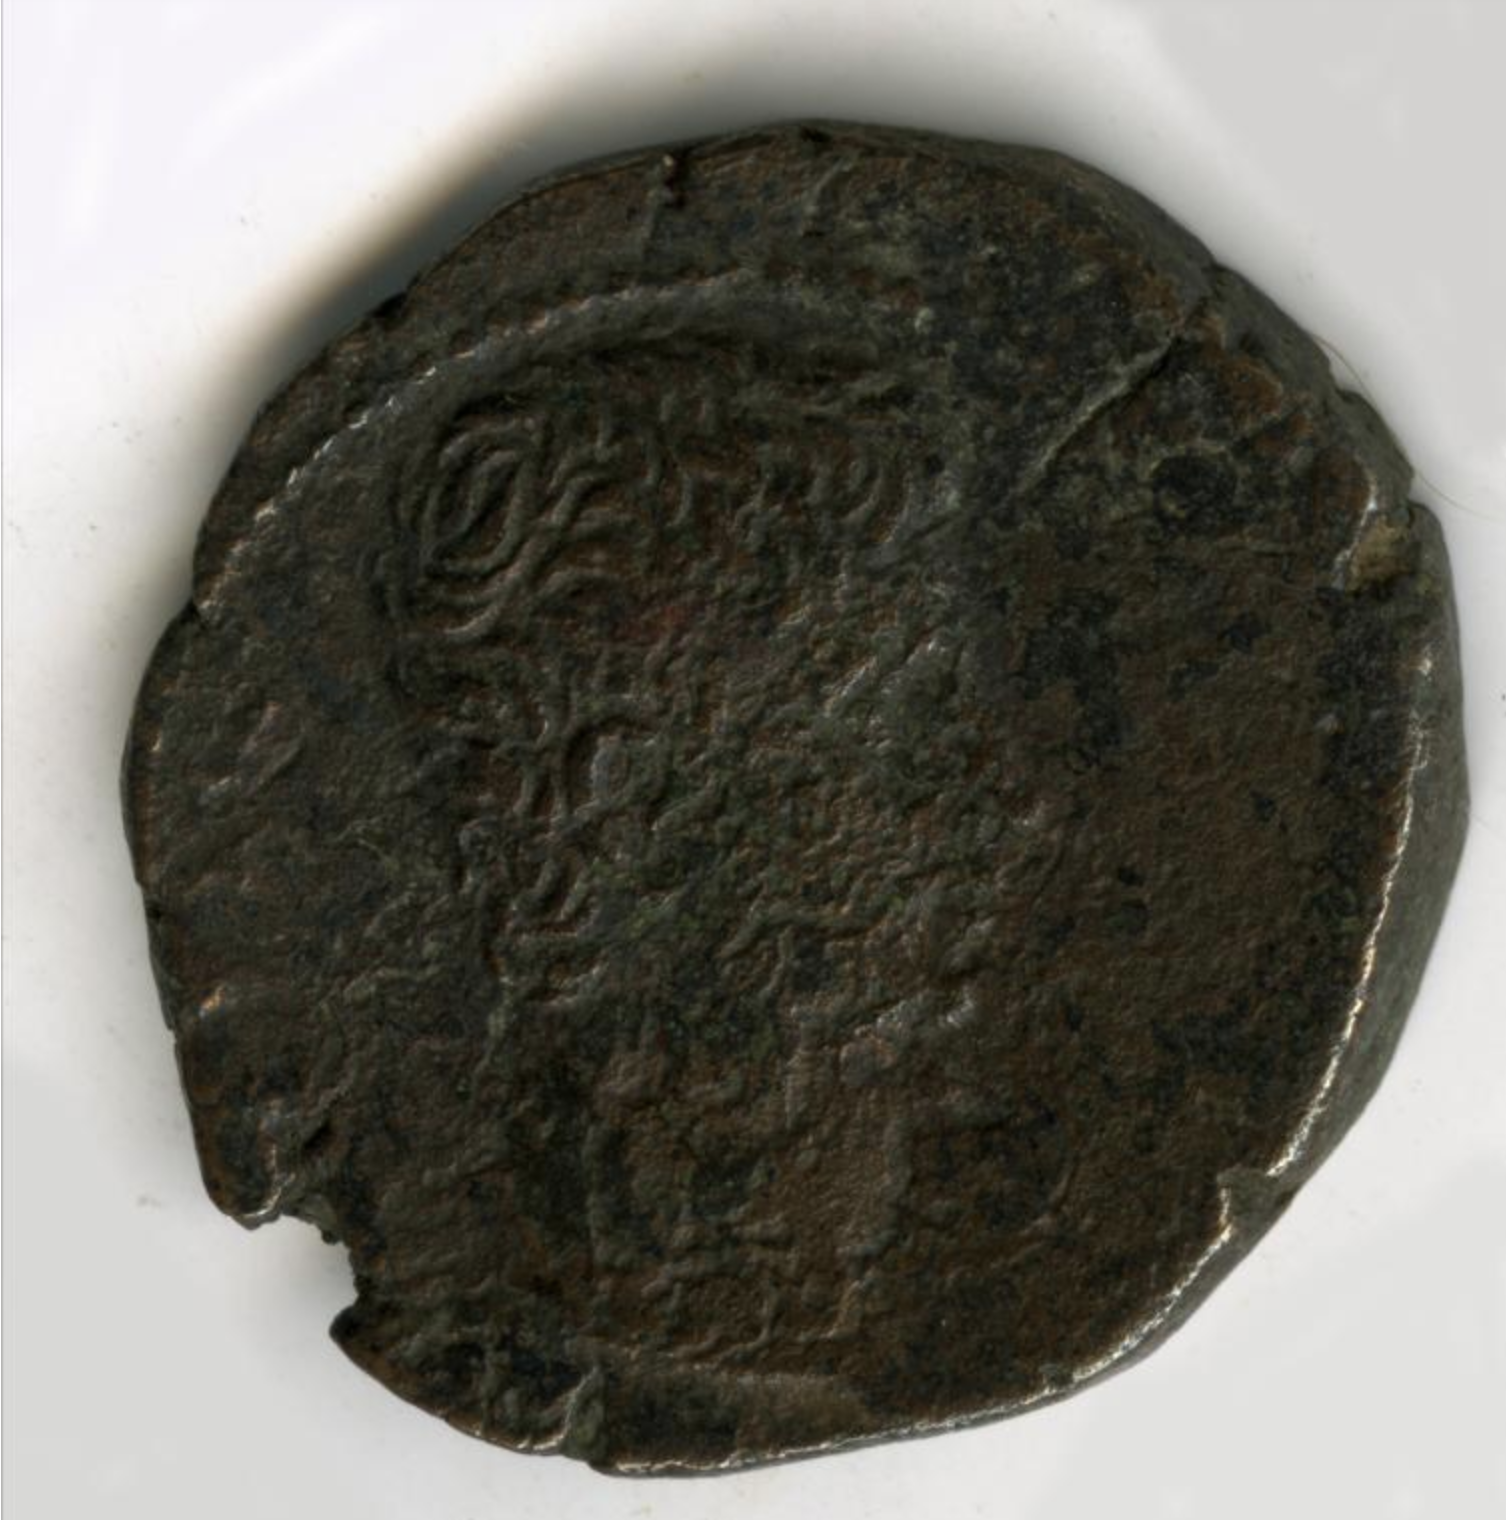 Coin showing Augustus